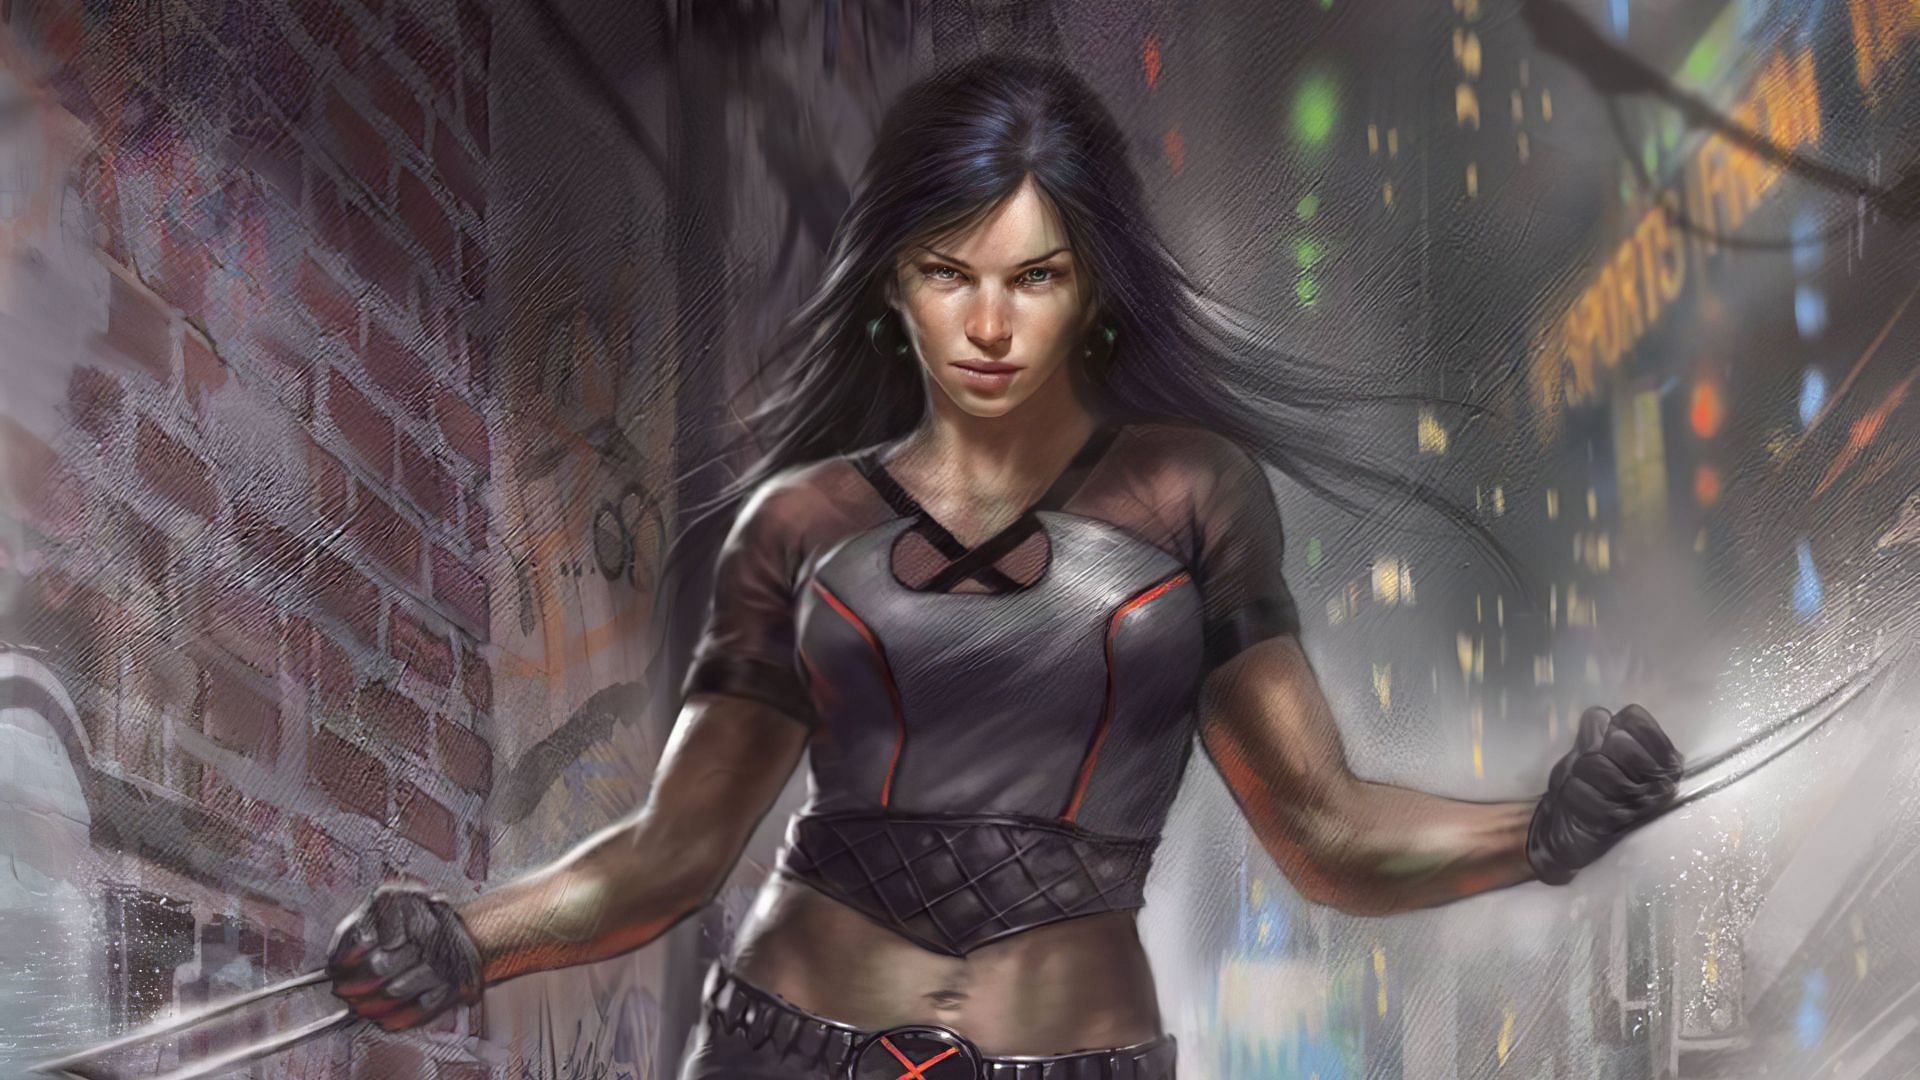 X-23 is a powerful and resourceful character who fights for justice and harmony. (Image via Marvel)